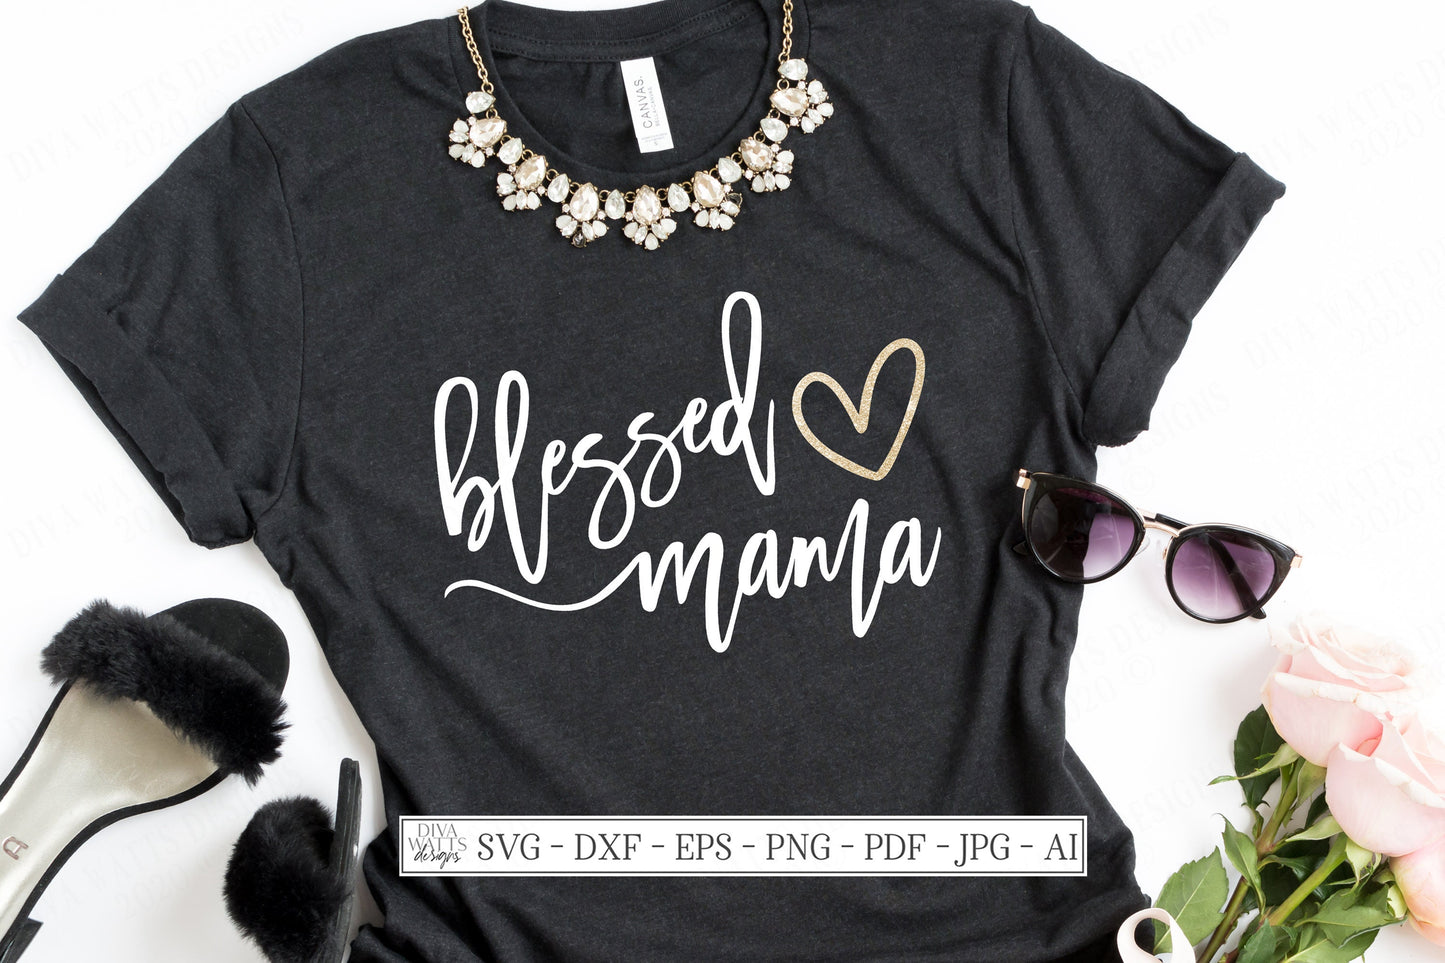 SVG | Blessed Mama | Cutting File | Mother's Day | Mom Mommy Mamma Mother | Vinyl Stencil HTV | Shirt Sign Tote | dxf eps Cricut Silhouette